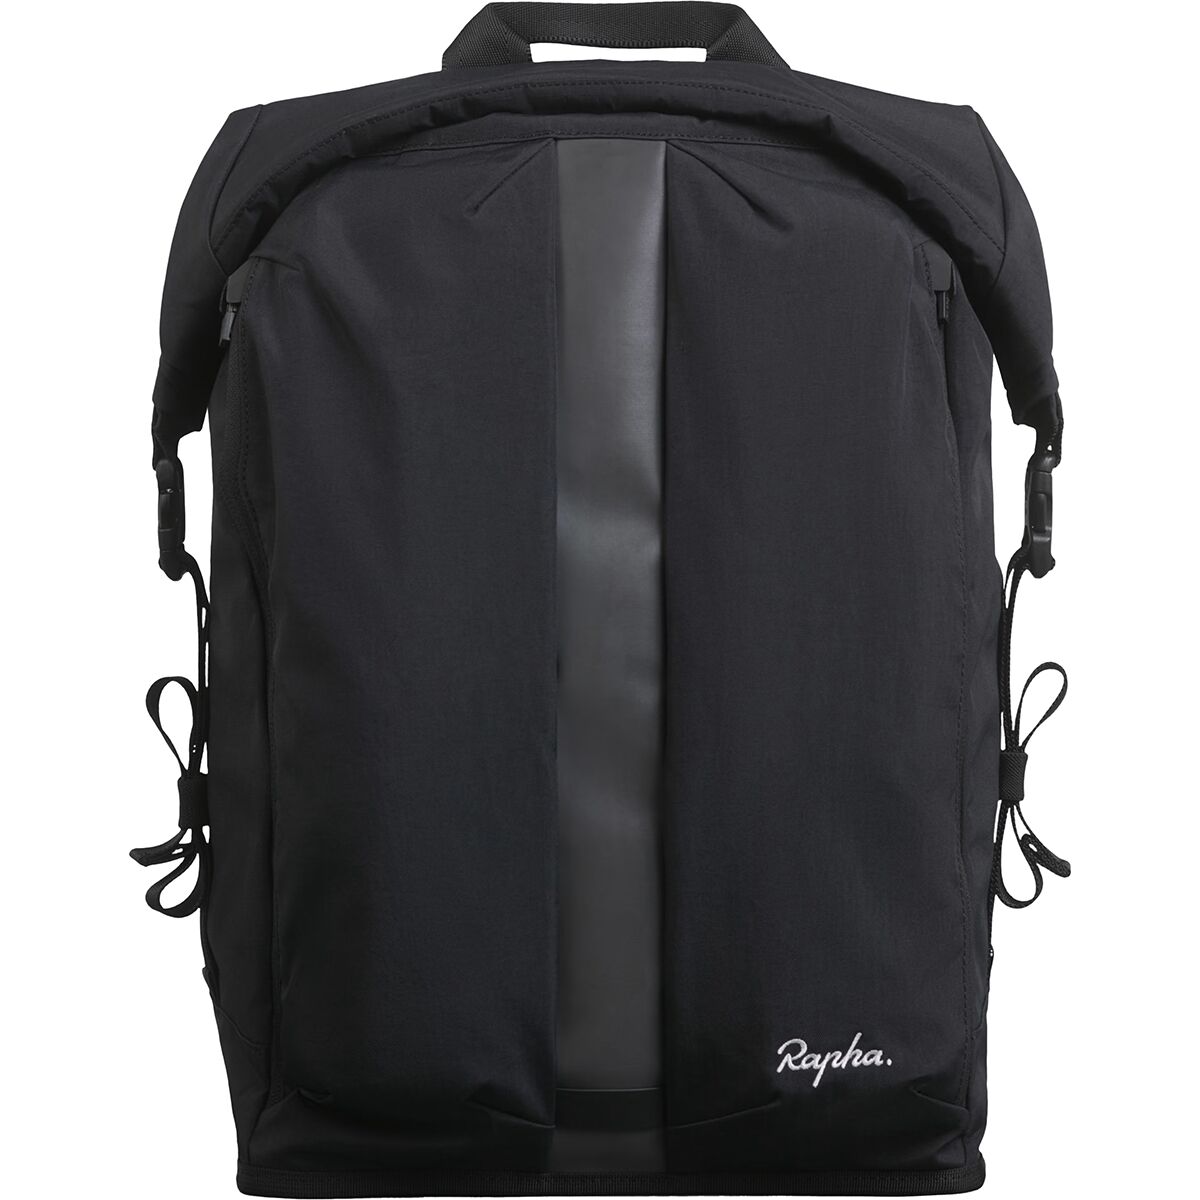 Rapha Backpack - Accessories